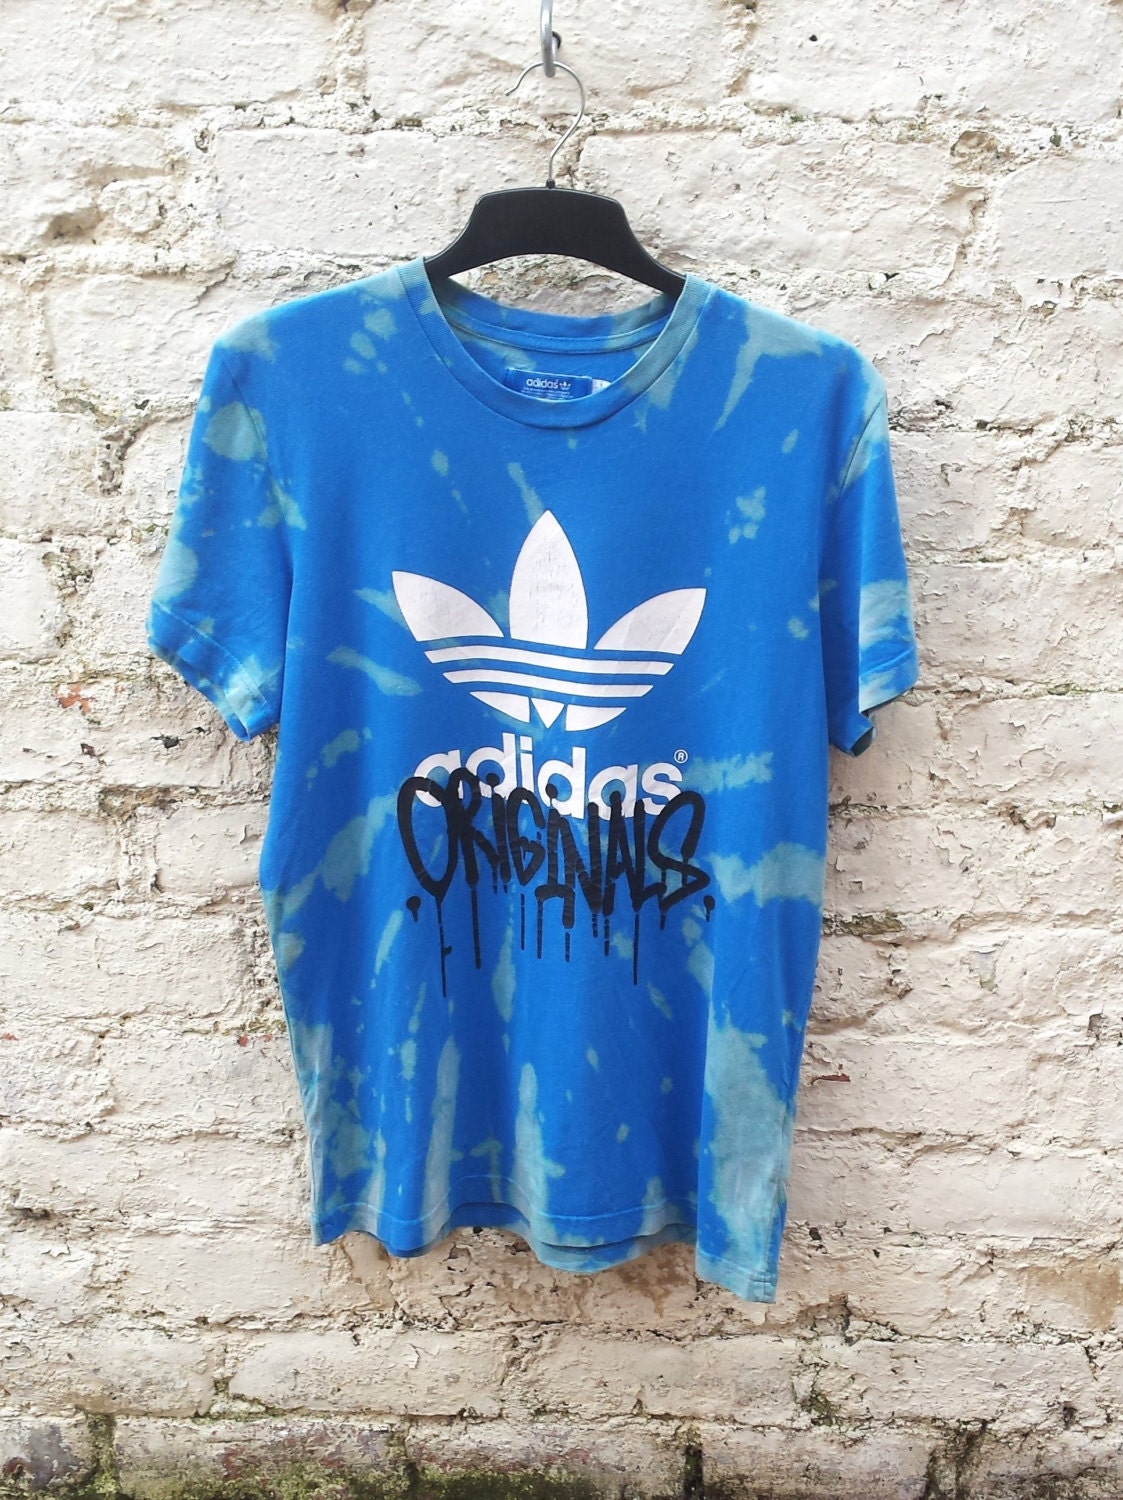 Adidas Originals Bleach Tie Dye Upcycle Shirt size M in Blue